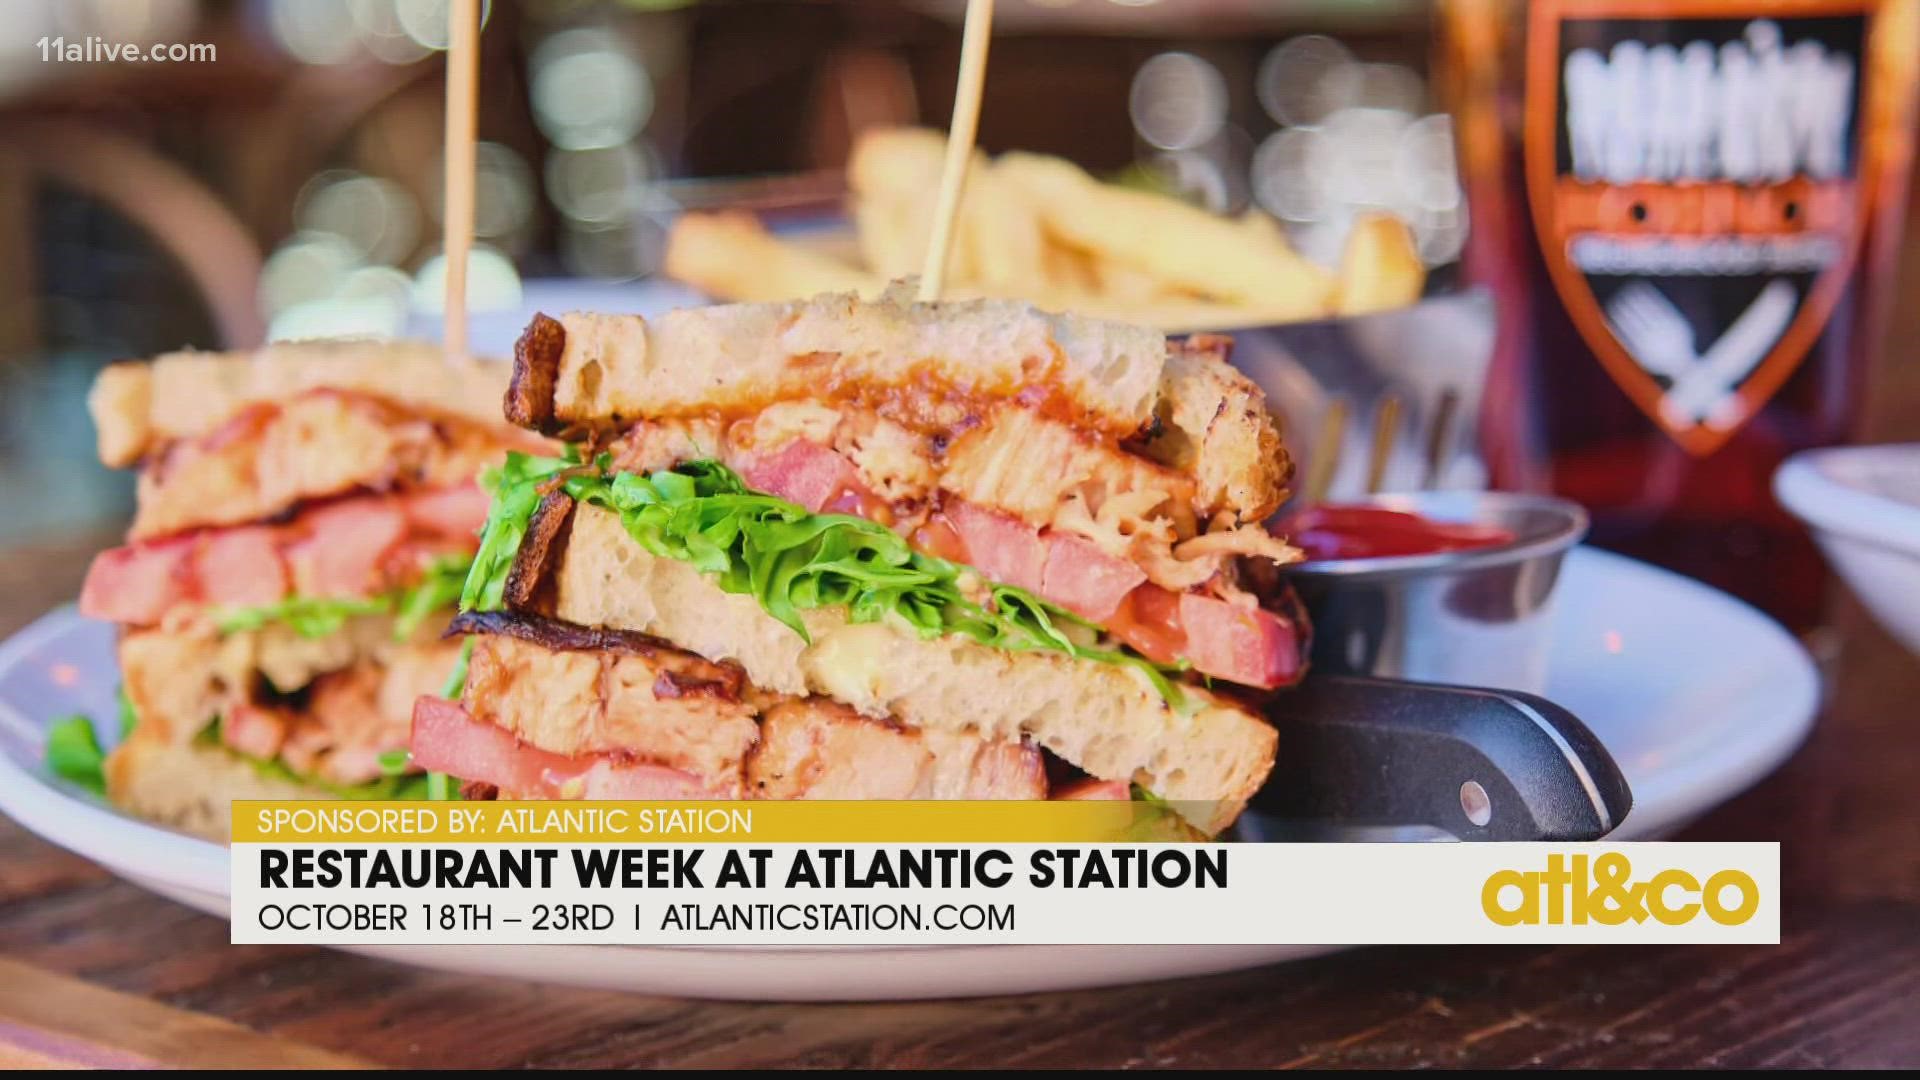 New flavors await at Atlantic Station! Discover all the tastes during Restaurant Week, starting Monday, October 18th.